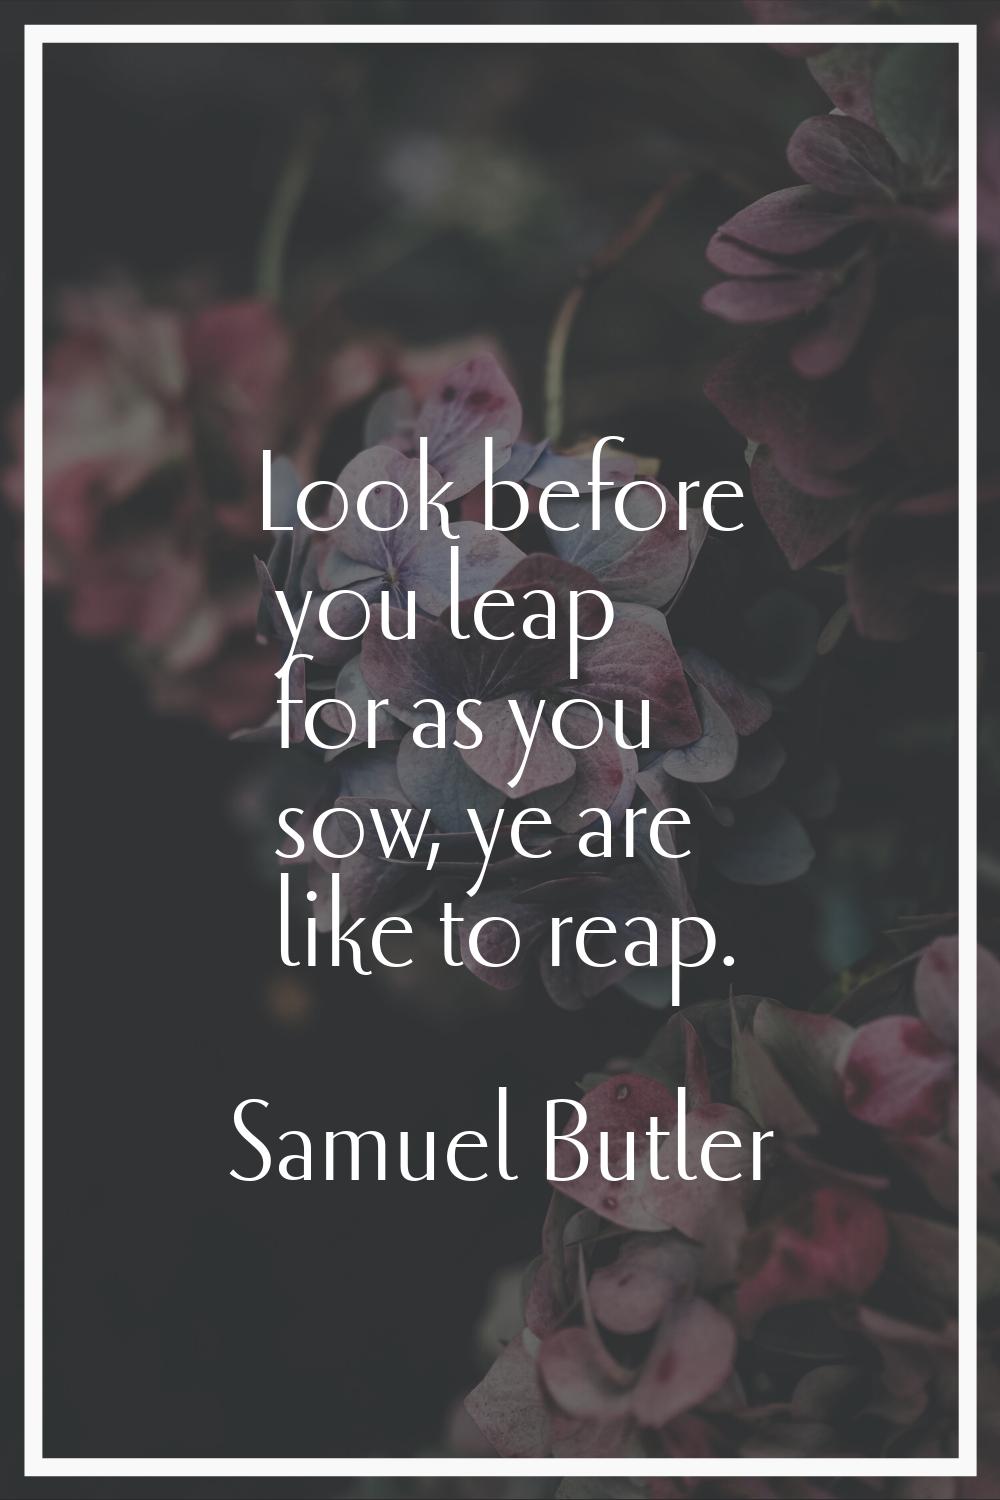 Look before you leap for as you sow, ye are like to reap.